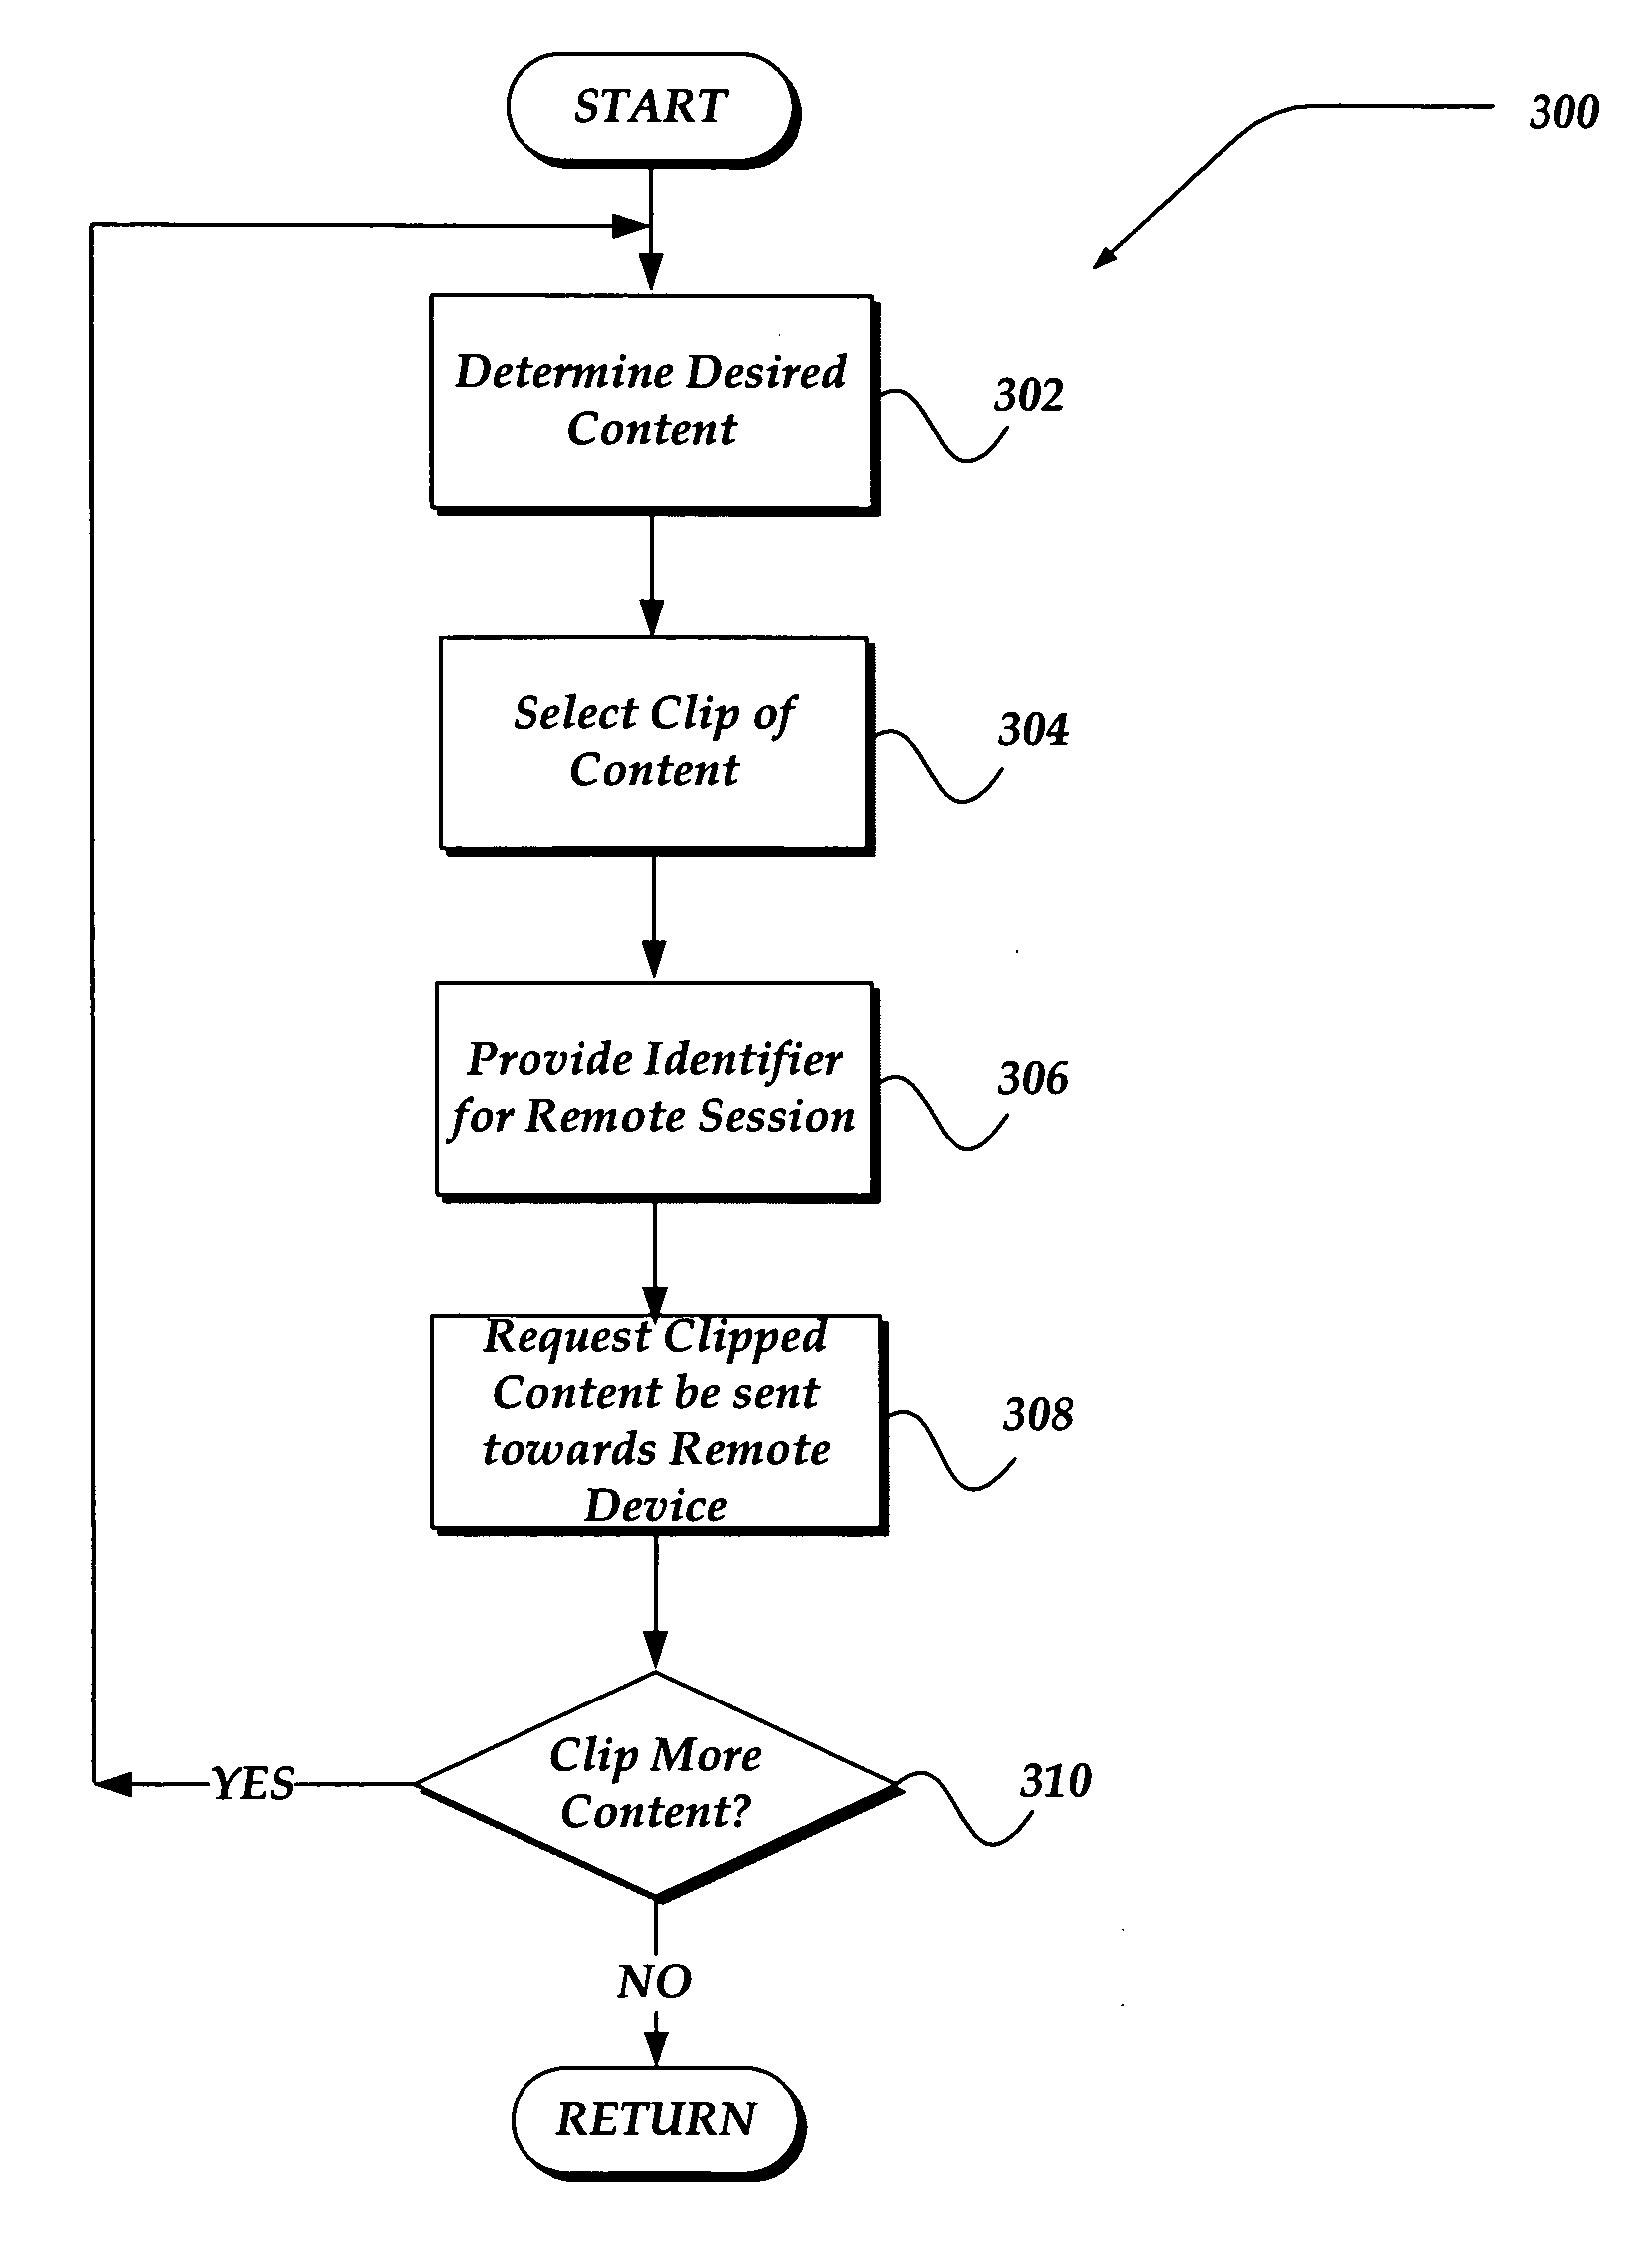 Session continuity for providing content to a remote device